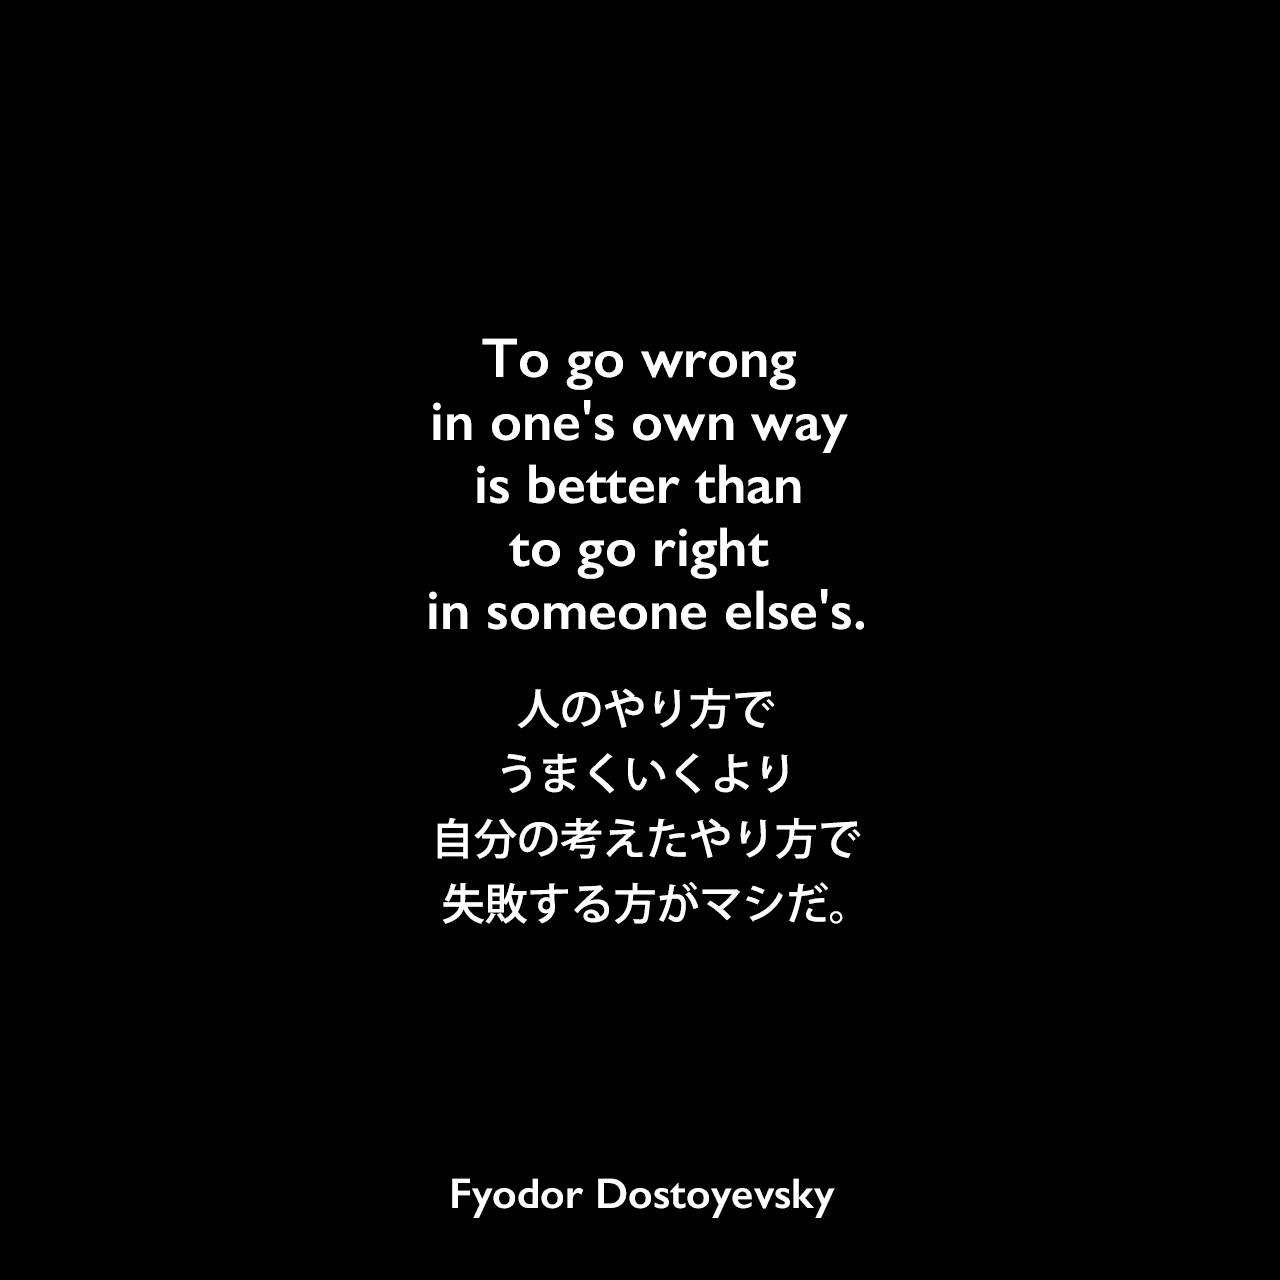 To go wrong in one’s own way is better than to go right in someone else’s.人のやり方でうまくいくより自分の考えたやり方で失敗する方がマシだ。